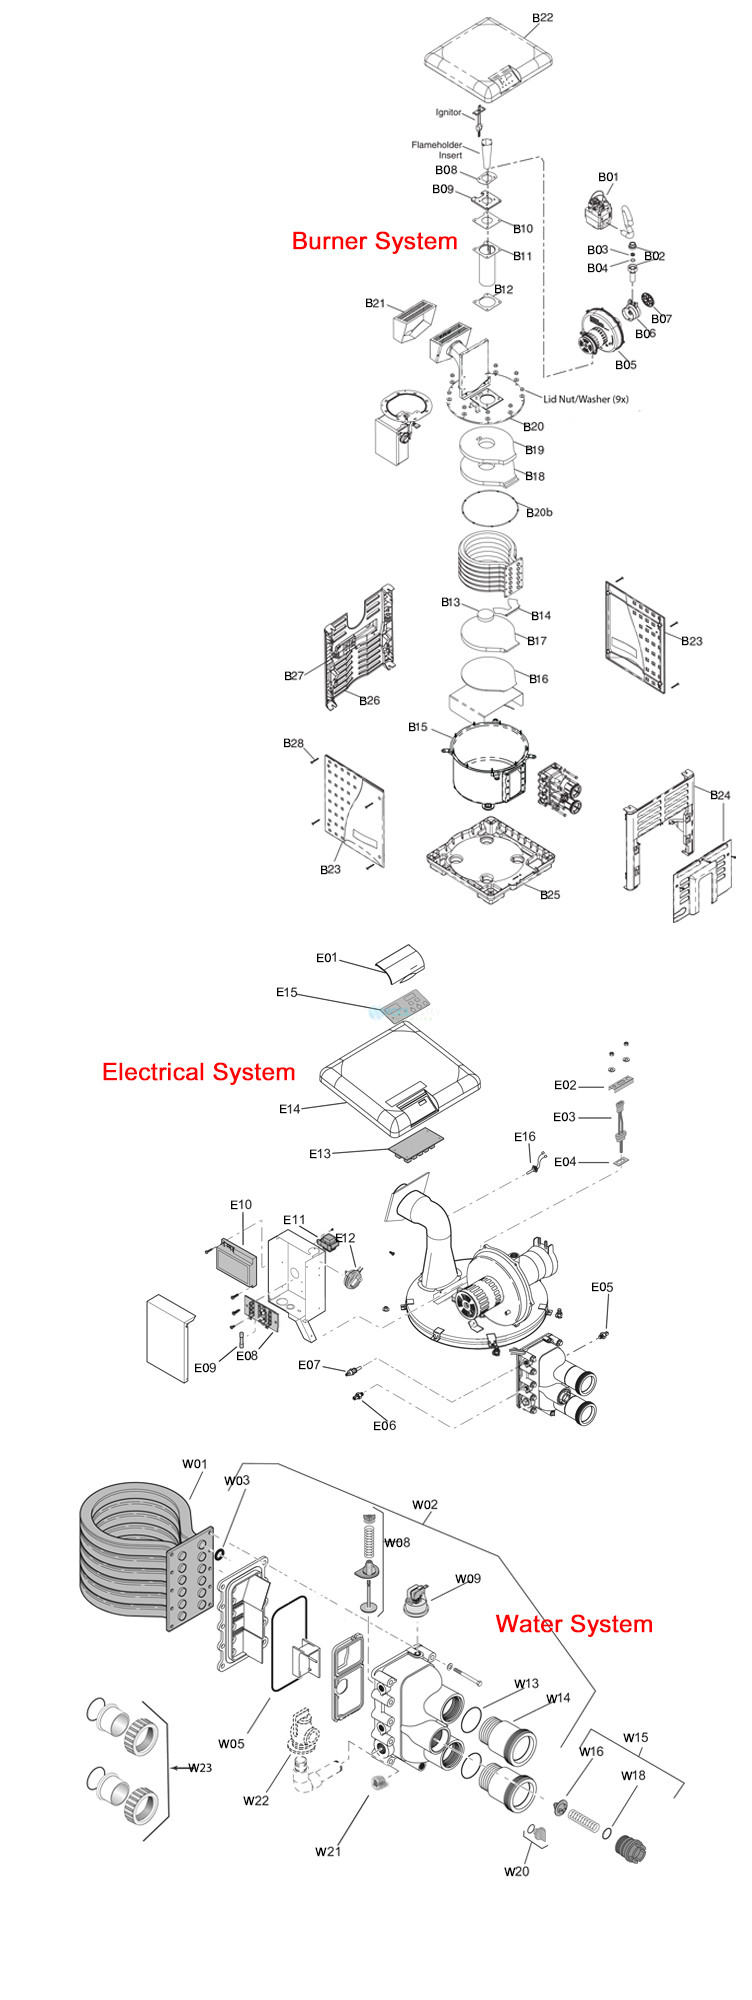 Pentair MasterTemp Low NOx Commercial Swimming Pool Heater - Electronic Ignition - Natural Gas - 250,000 BTU ASME - 460771 Parts Schematic